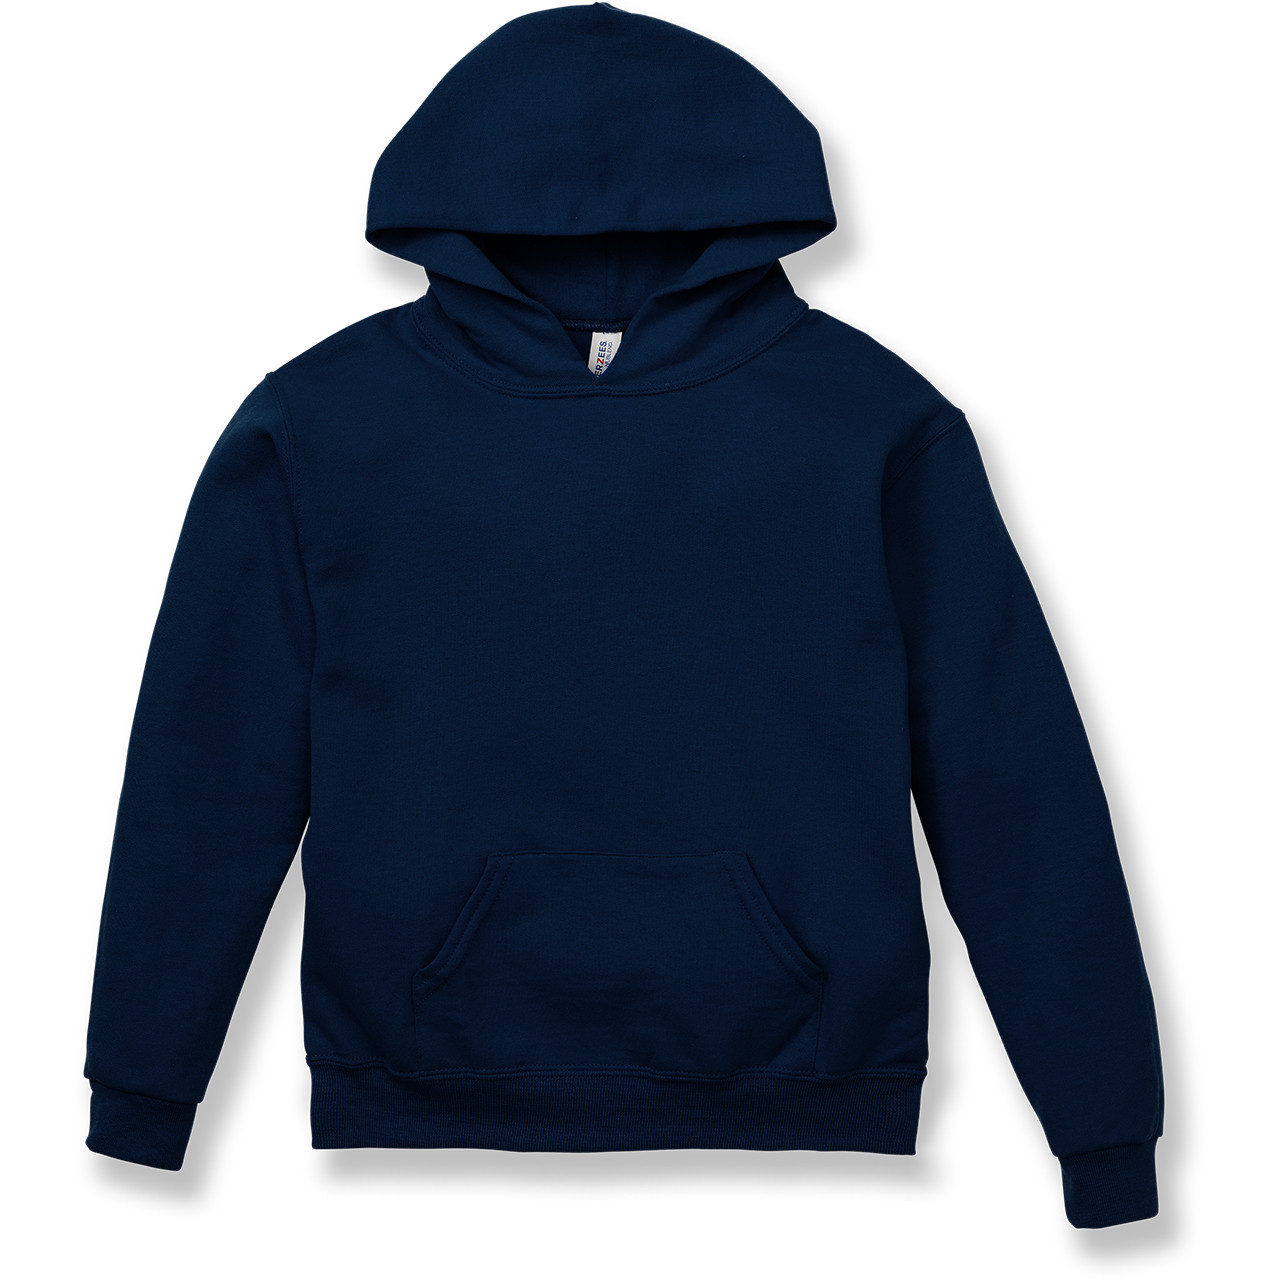 Full-Zip Hooded Sweatshirt with embroidered logo [NJ031-993/PAY-OXFORD] -  FlynnO'Hara Uniforms